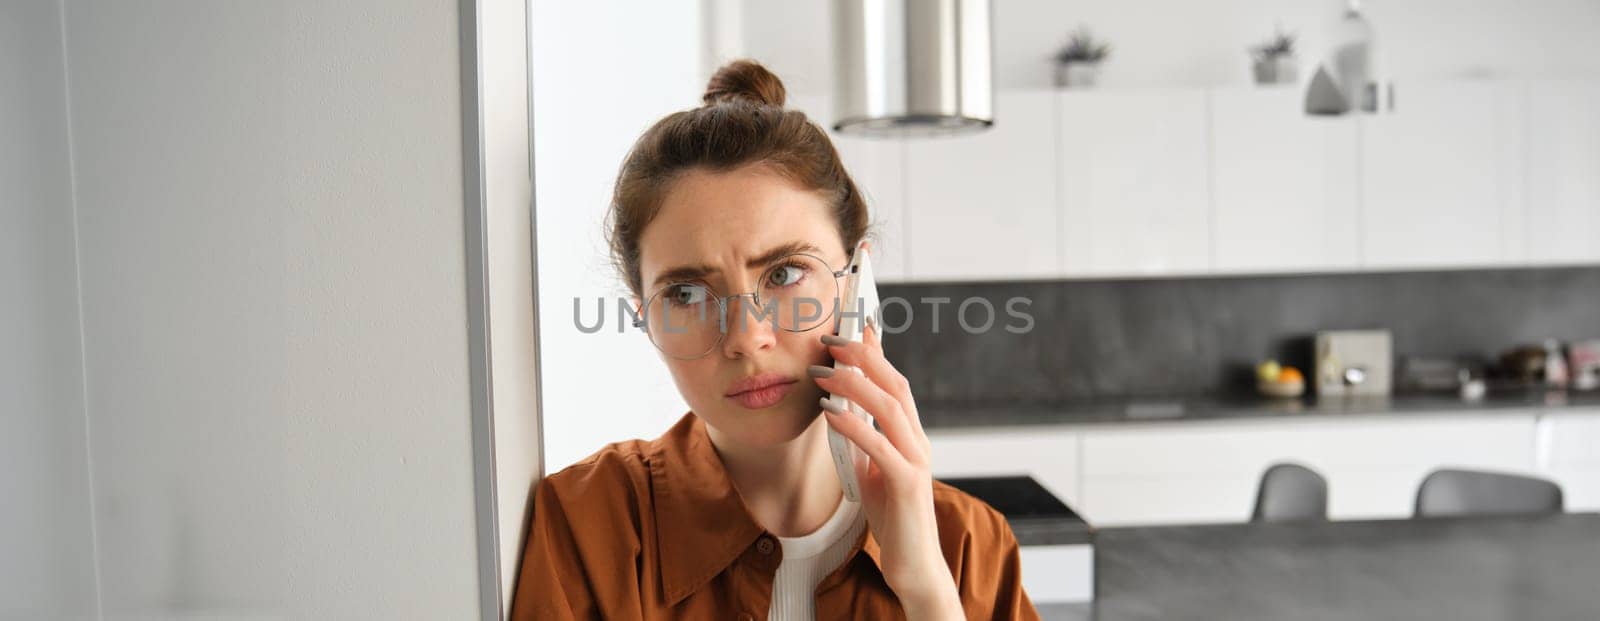 Portrait of woman with disappointed face, standing at home, answers phone call with concerned face, has difficult telephone conversation.